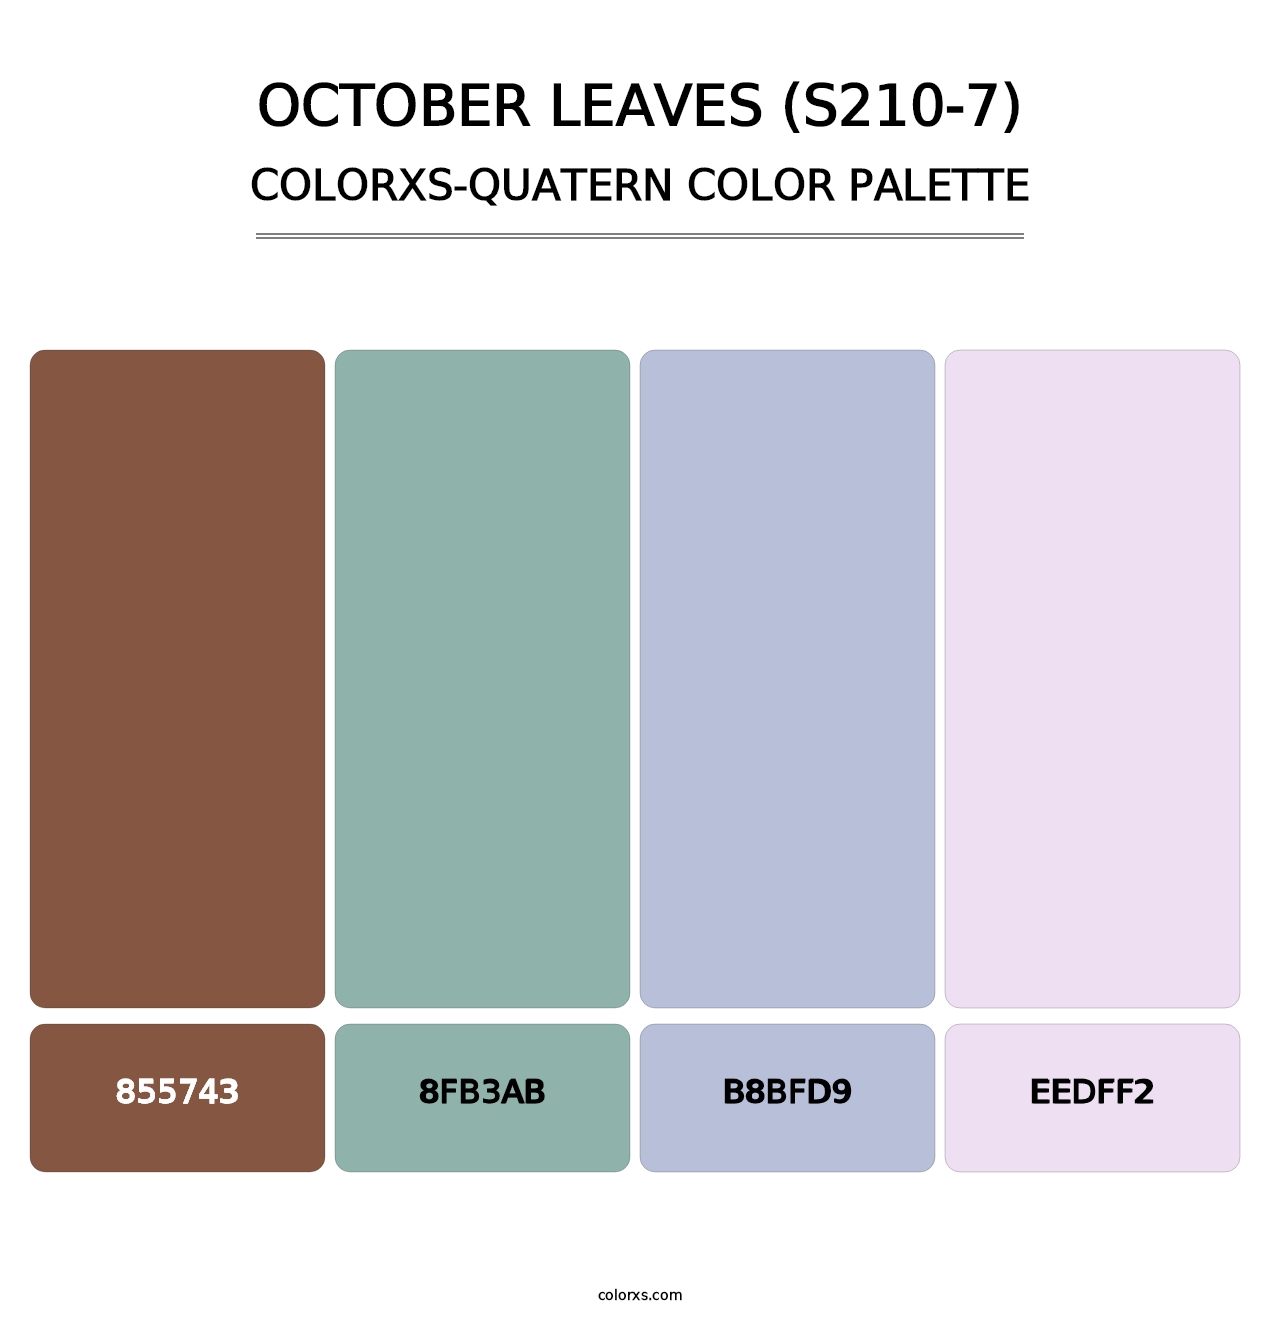 October Leaves (S210-7) - Colorxs Quatern Palette